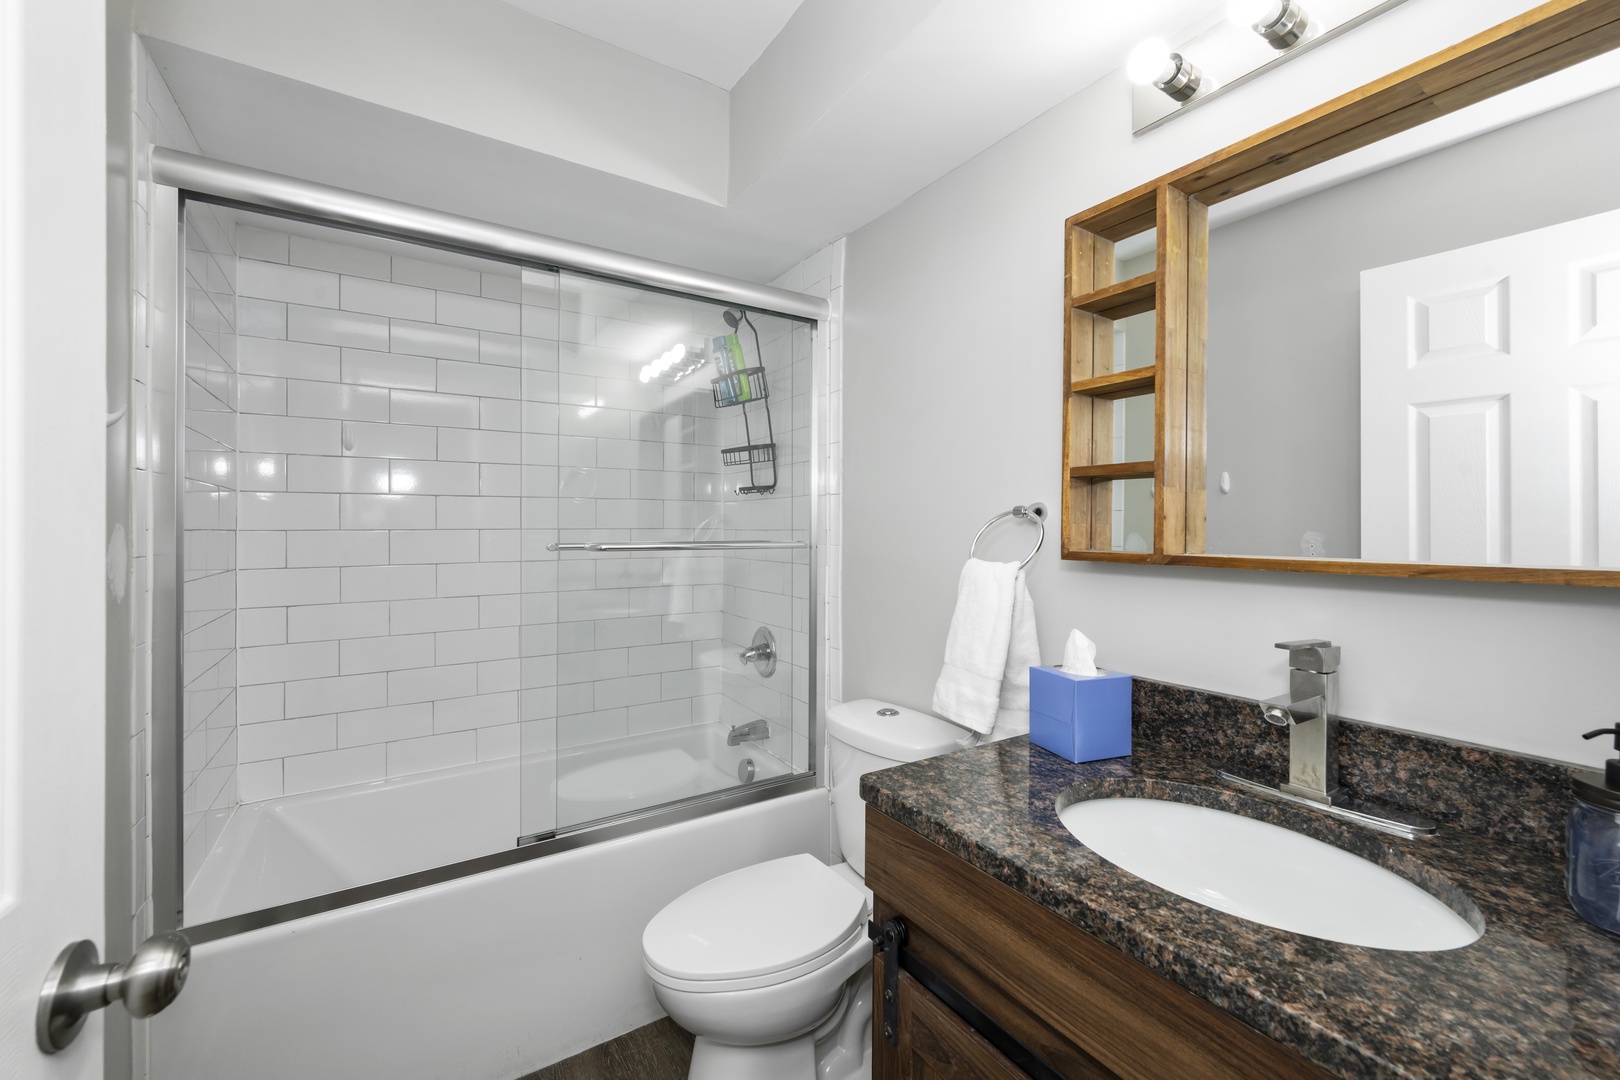 The lower-level full bathroom includes a single vanity & shower/tub combo